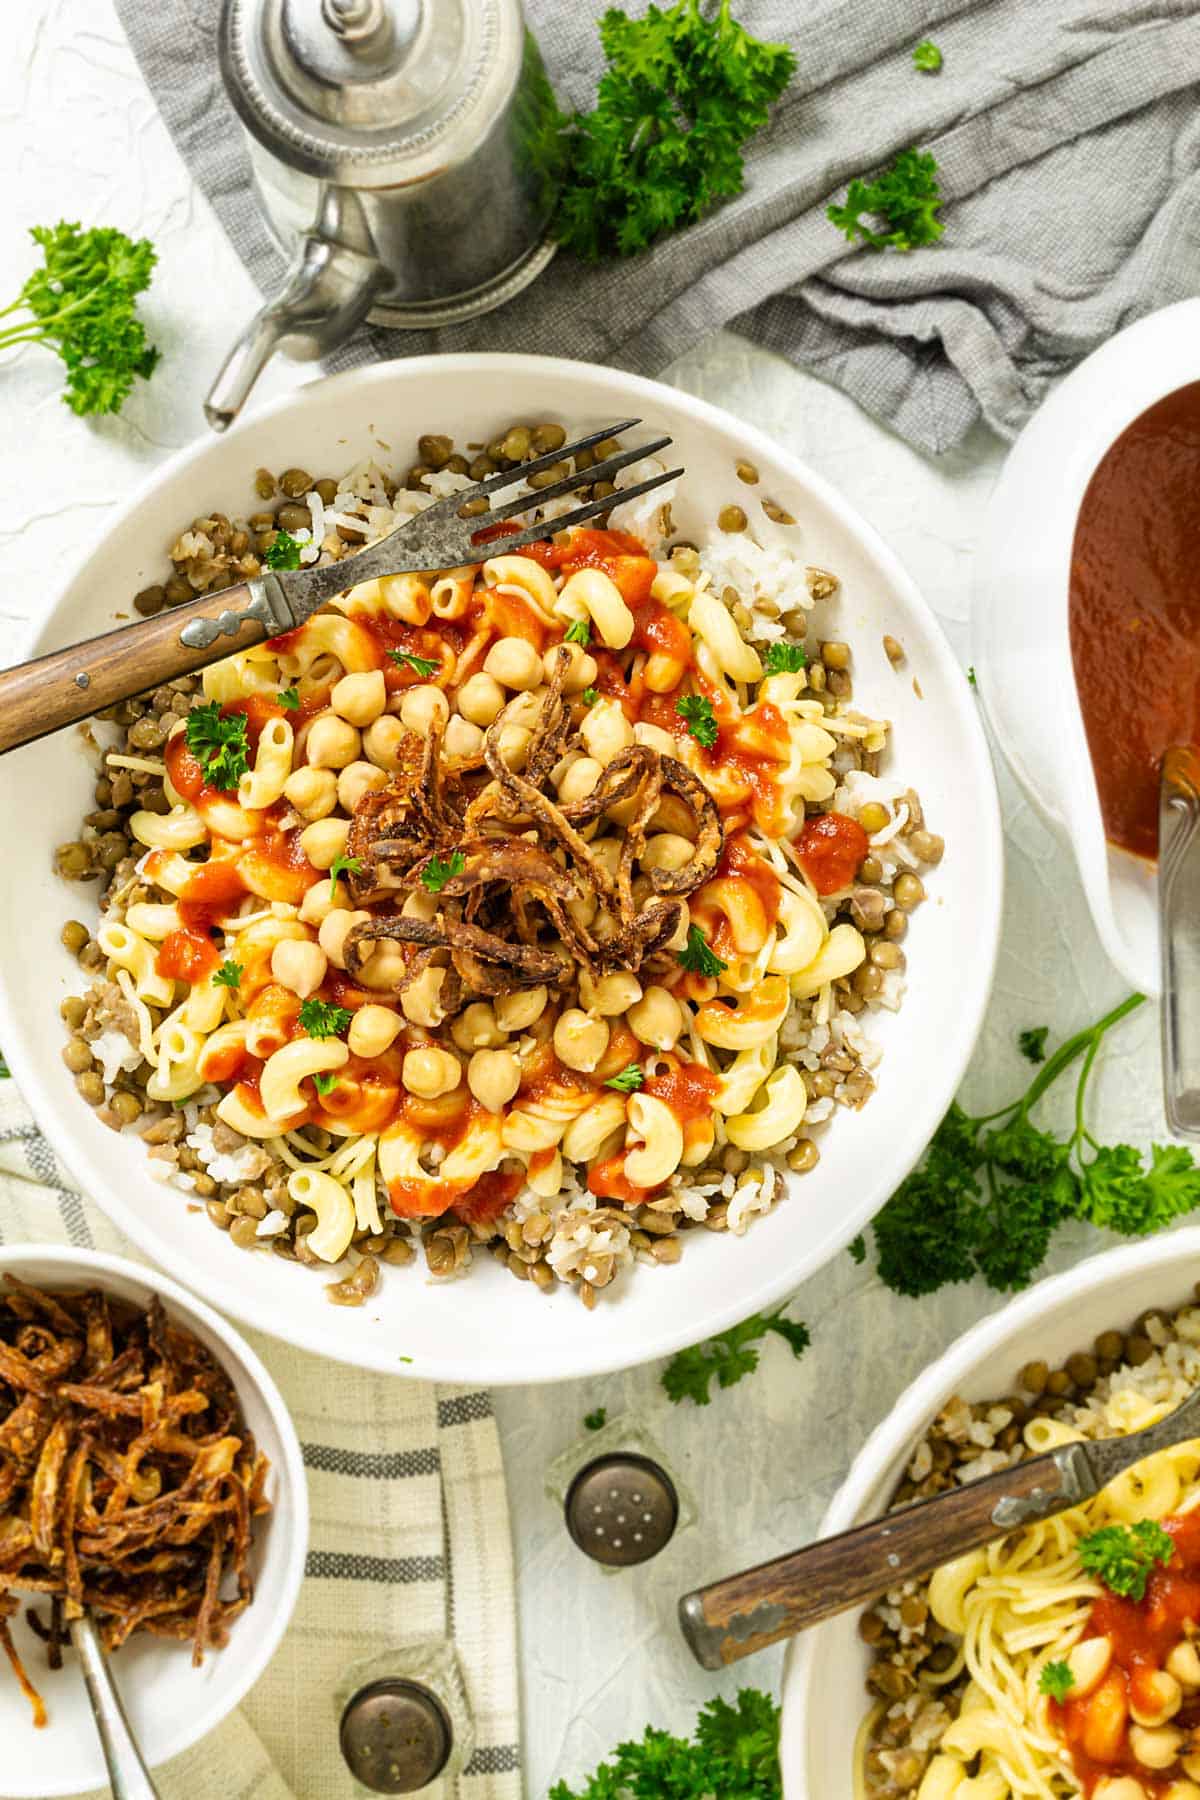 Egyptian Kushari Recipe with Pasta, Rice, and Lentils • All that’s Jas